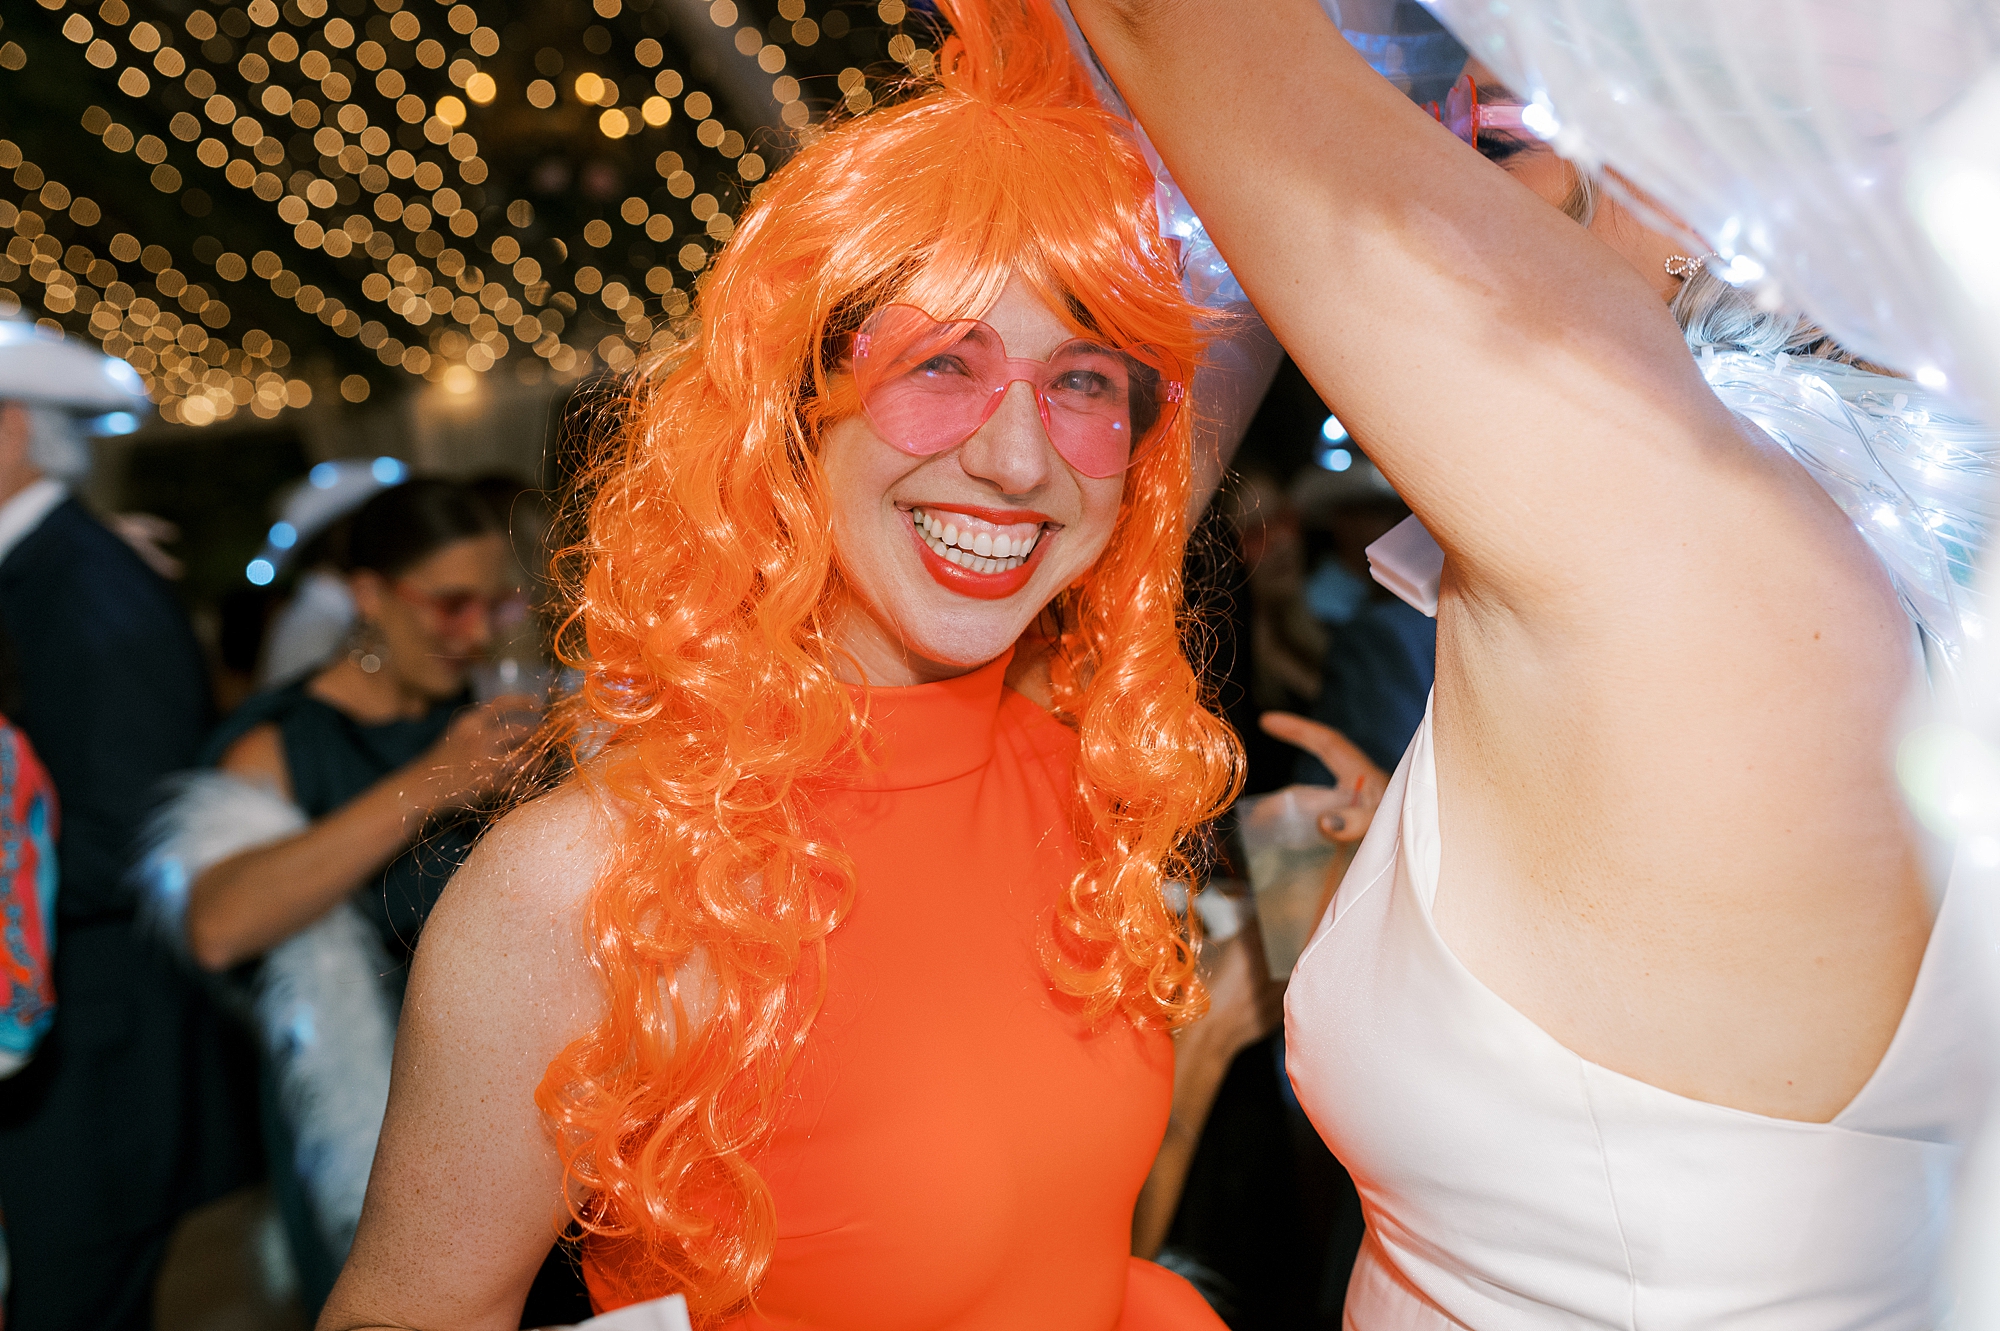 guest dances in orange dress and wig at the University of Louisiana at Lafayette alumni center